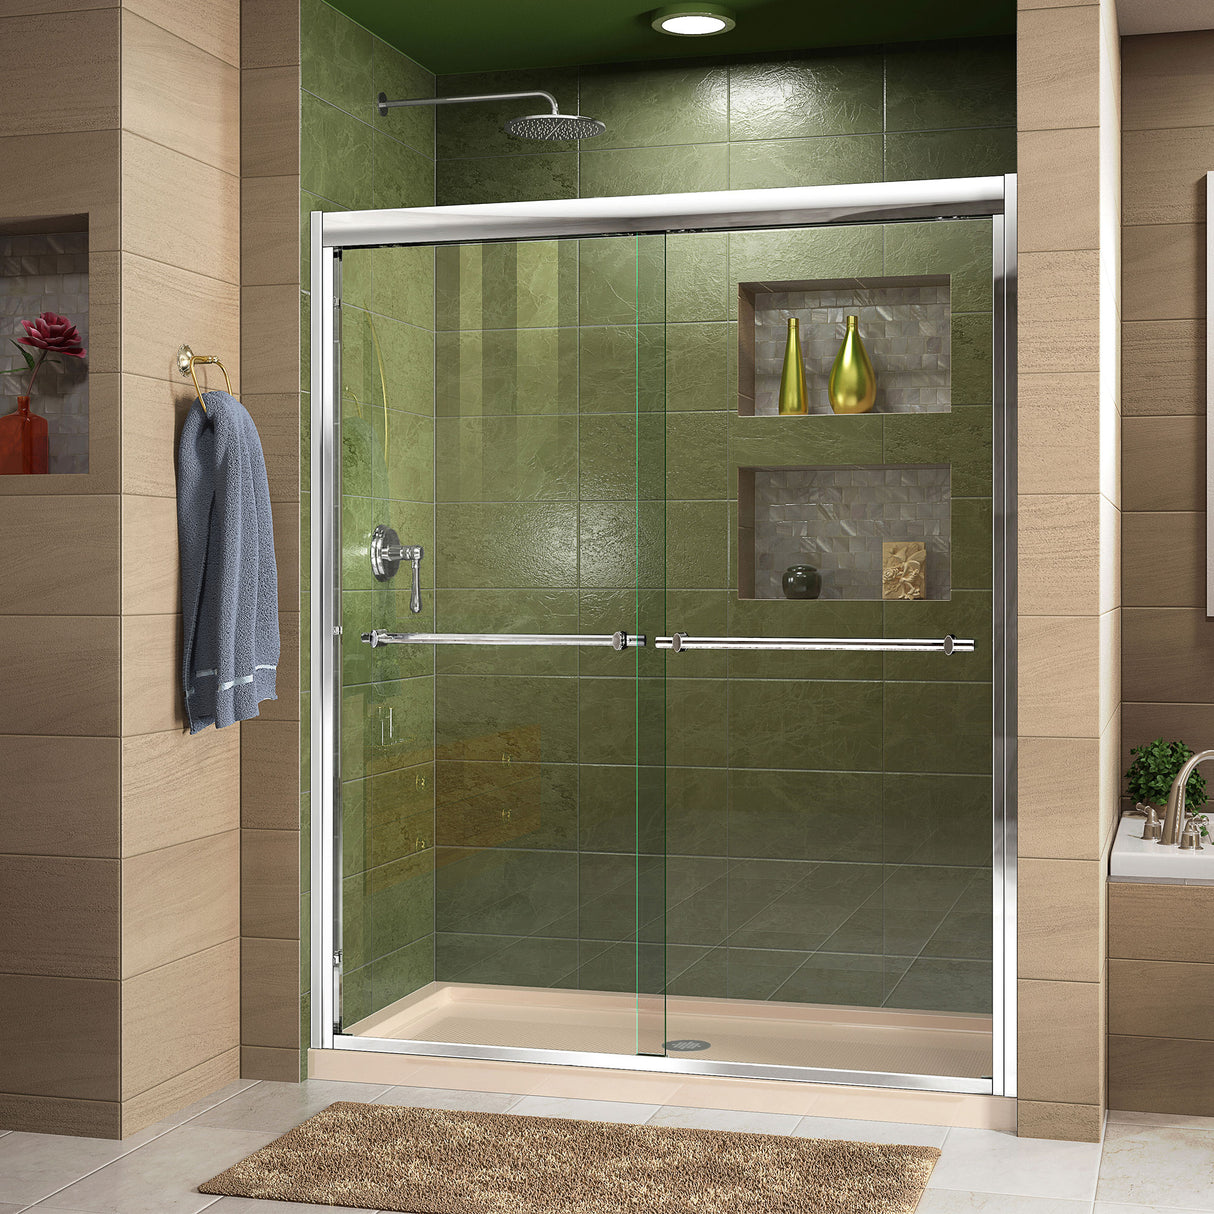 DreamLine Duet 36 in. D x 48 in. W x 74 3/4 in. H Semi-Frameless Bypass Shower Door in Chrome and Center Drain Biscuit Base